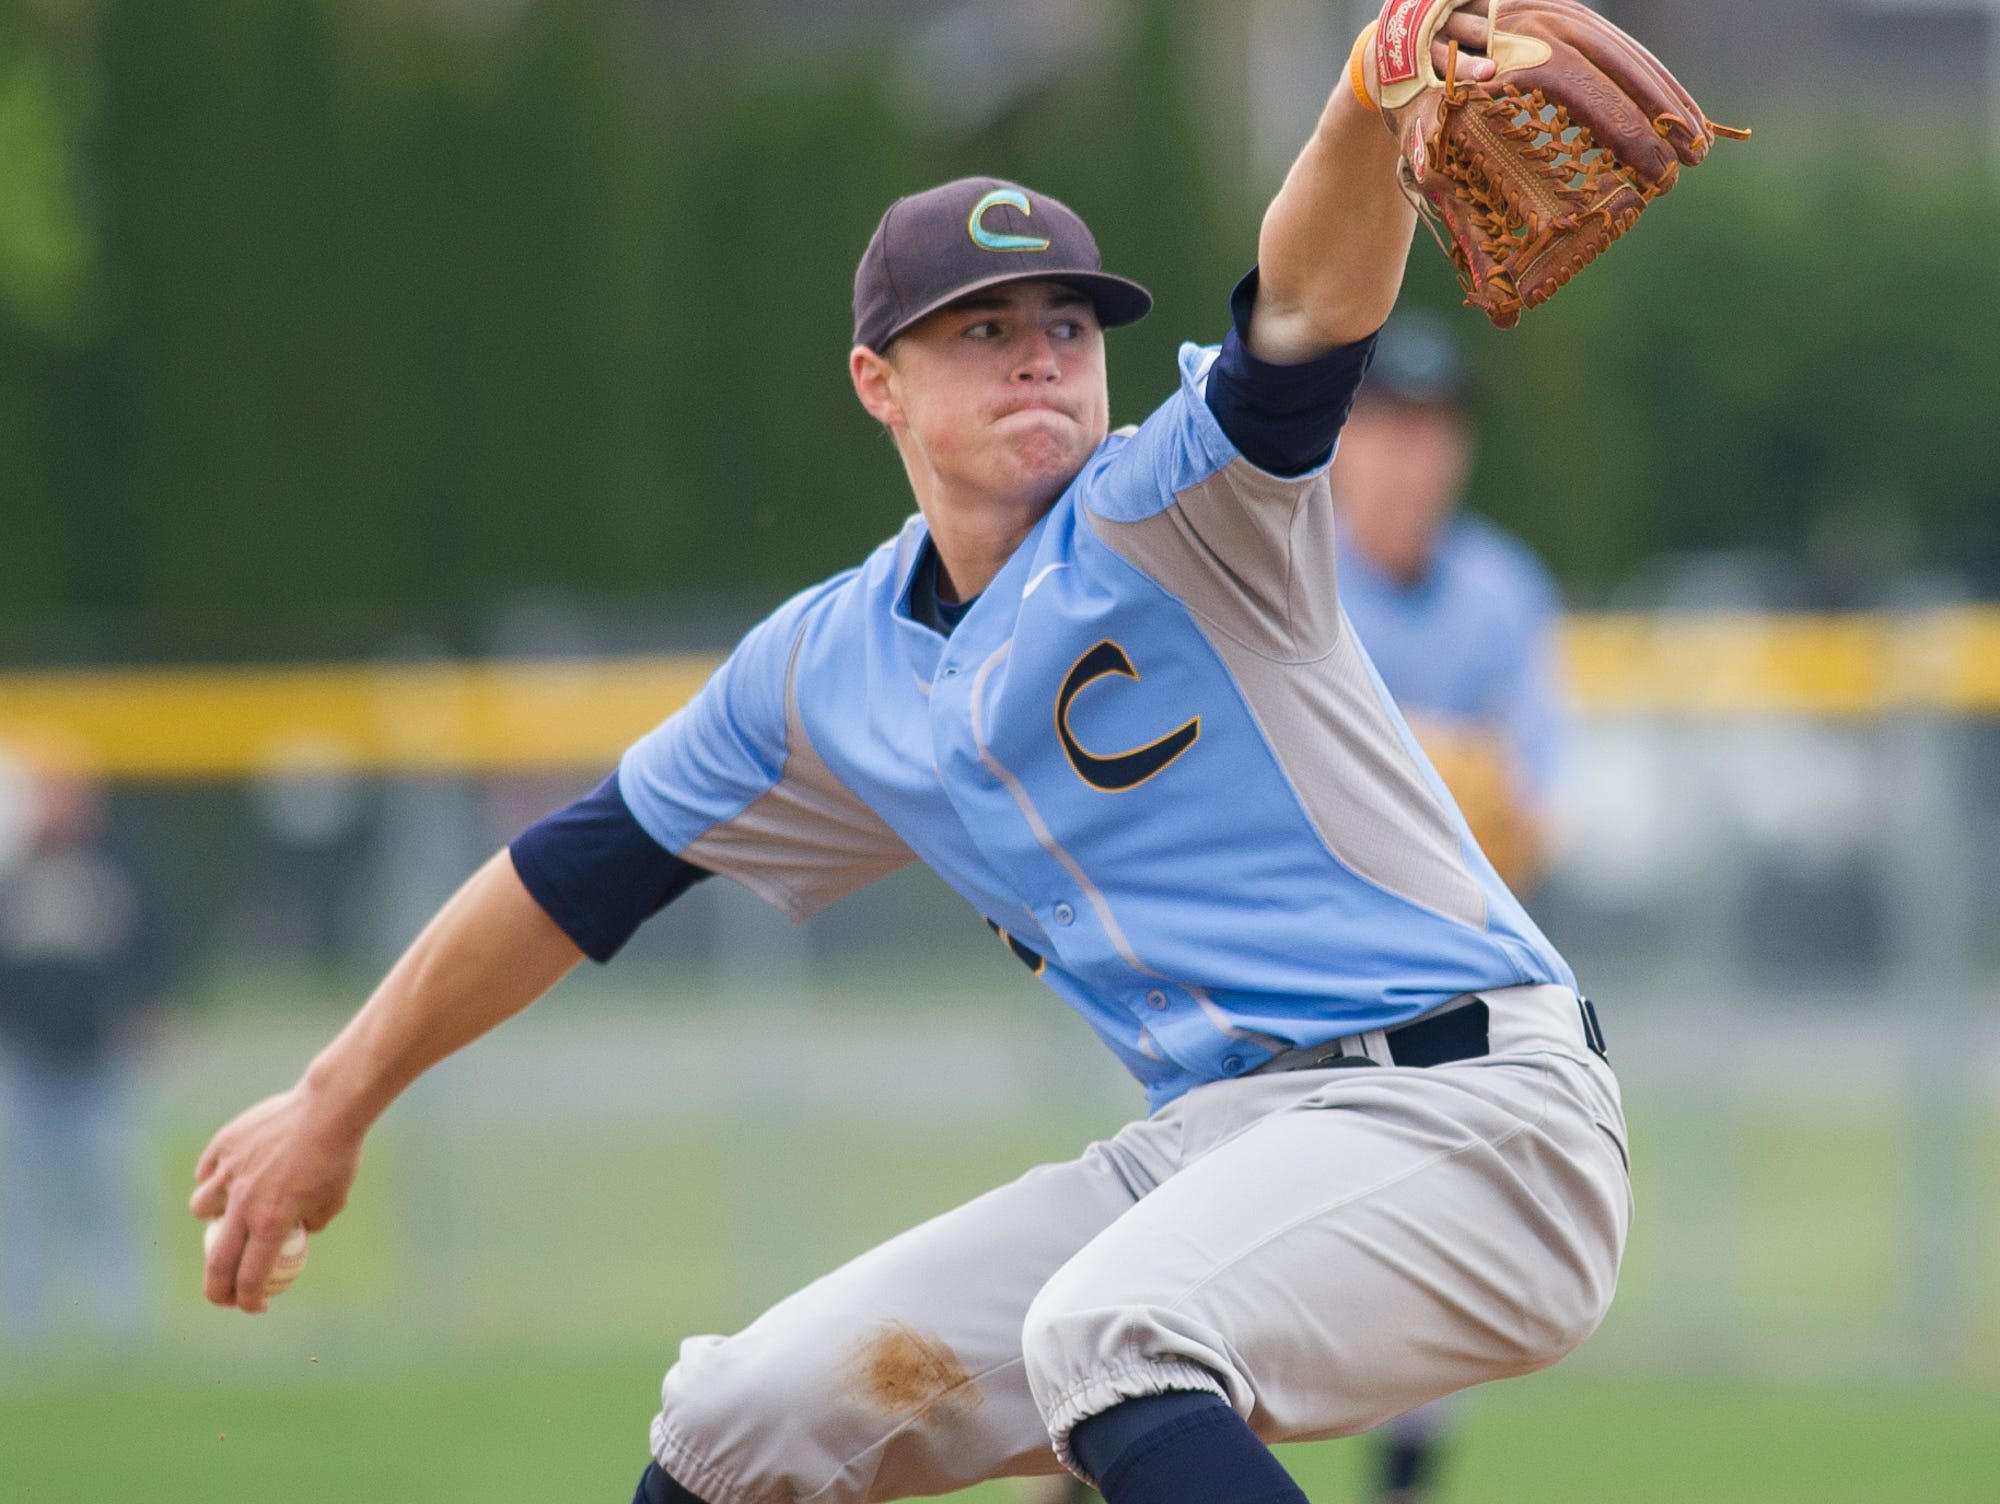 Cape Henlopen's pitcher Noah Clifton (4) sends a pitch in the 1st inning against Salesianum.